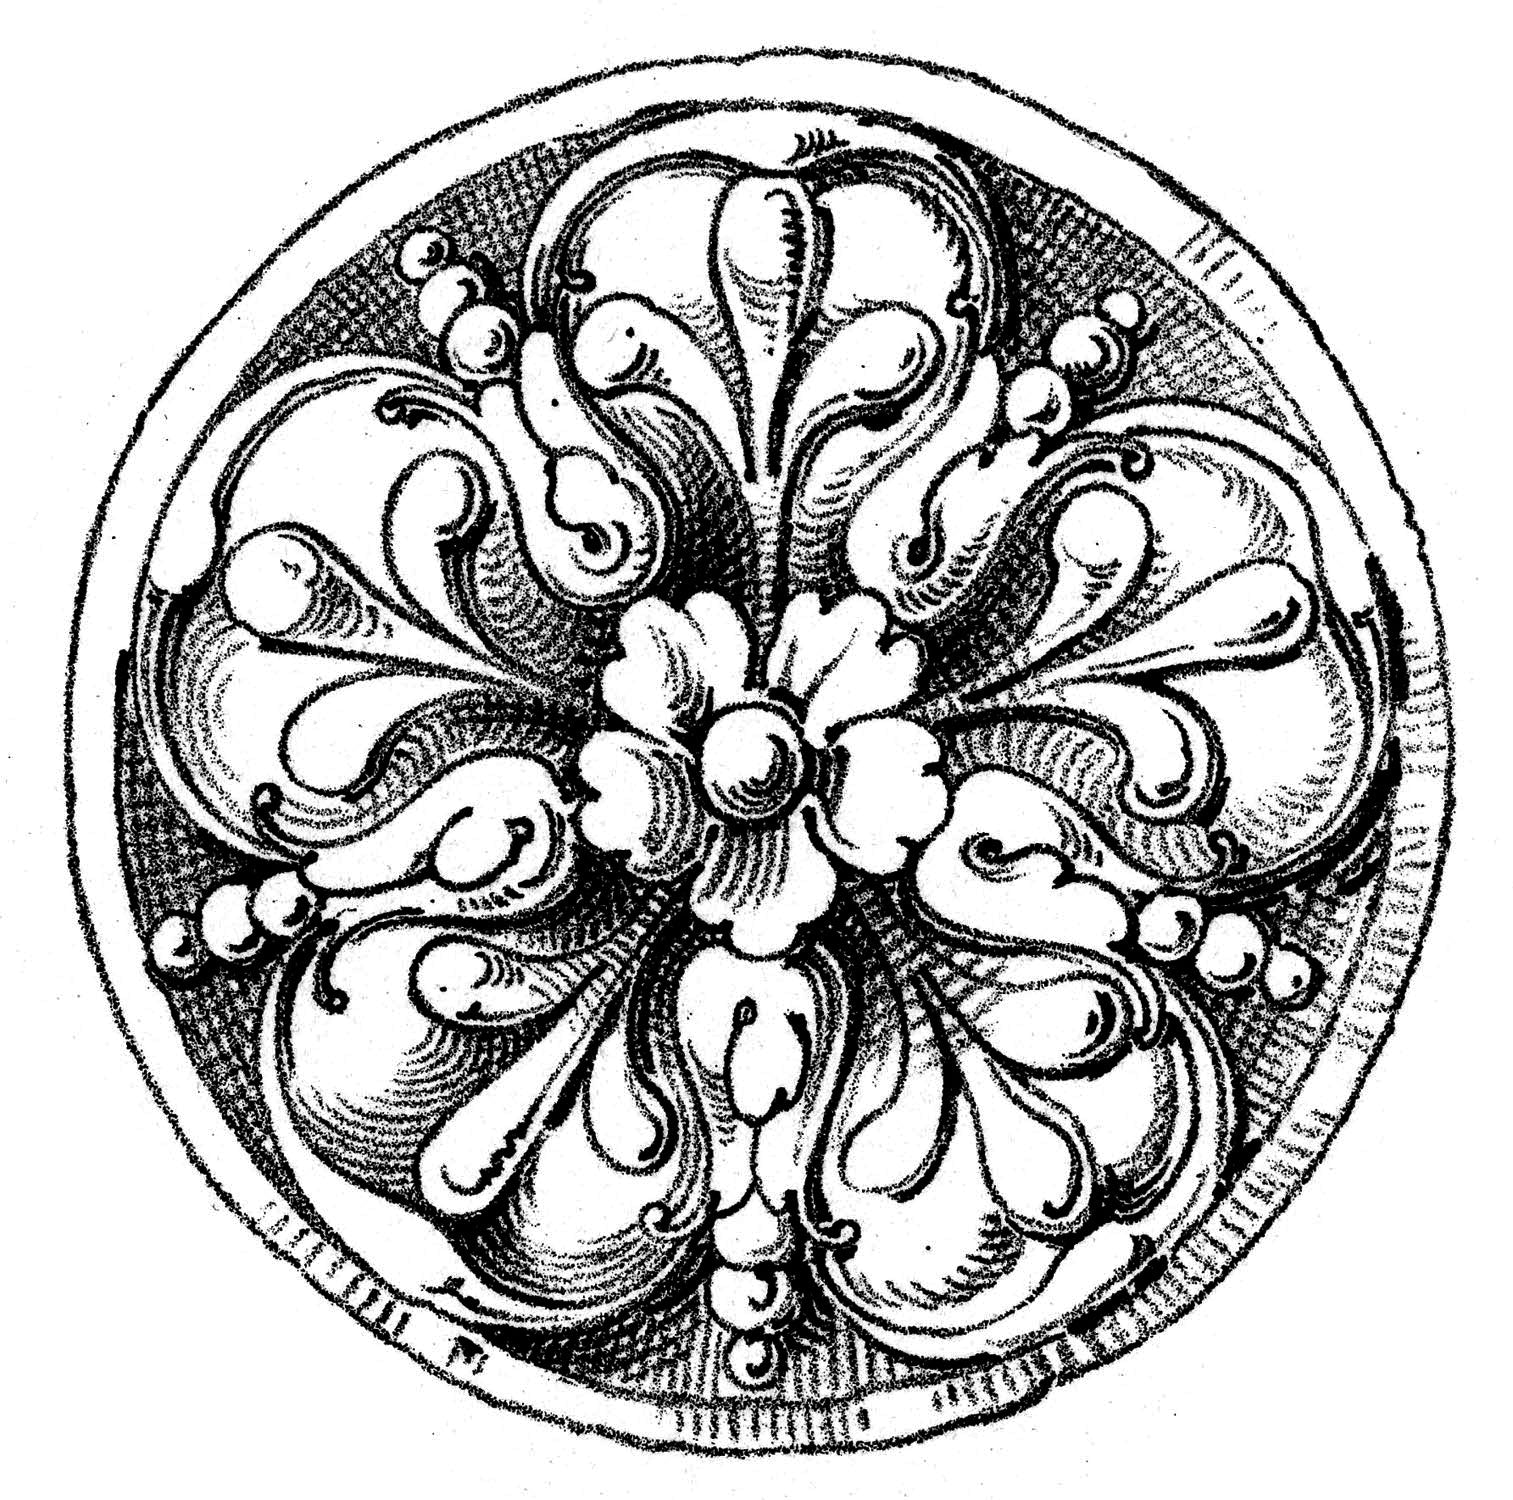 black and white sketch of a round or circular rosette design for brockwell incorporated's illustrated glossary of architectural terms